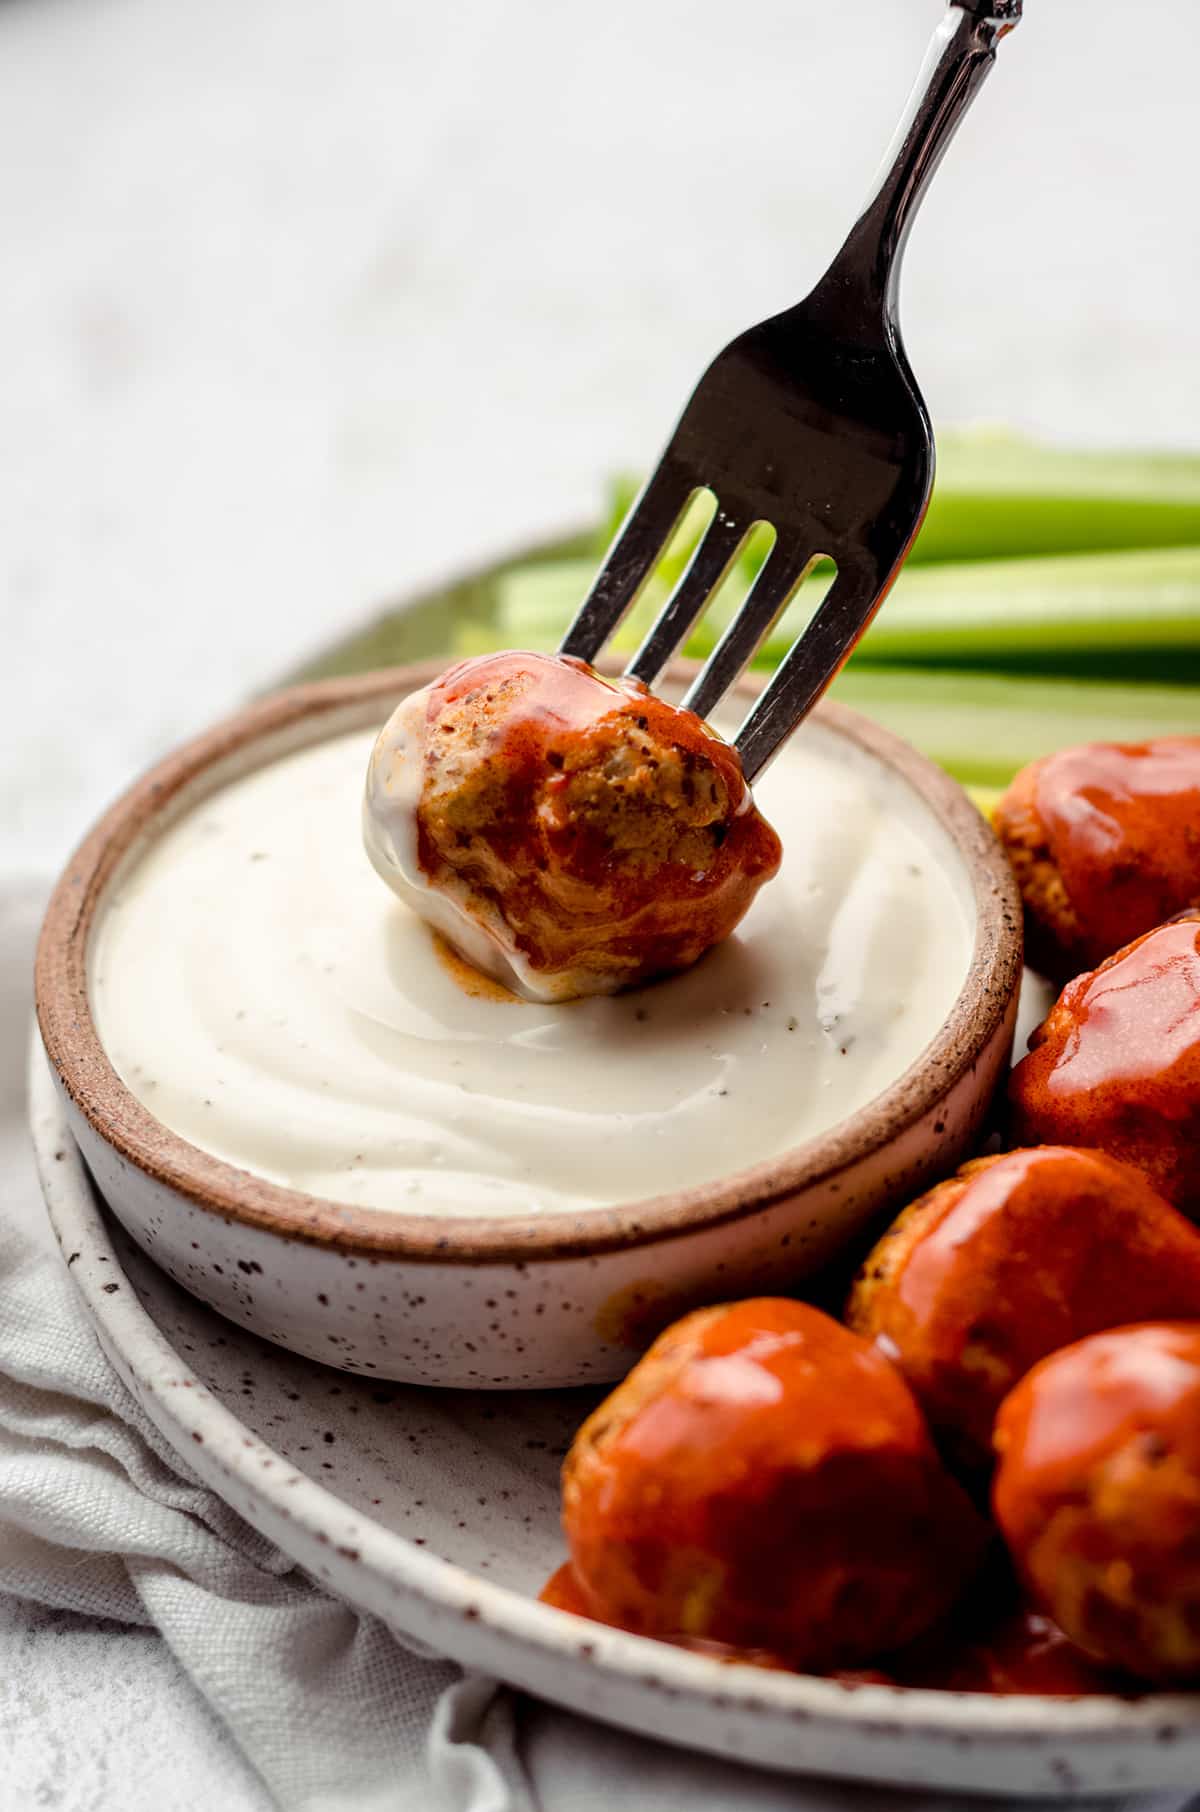 Dipping a meatball in a creamy dressing.